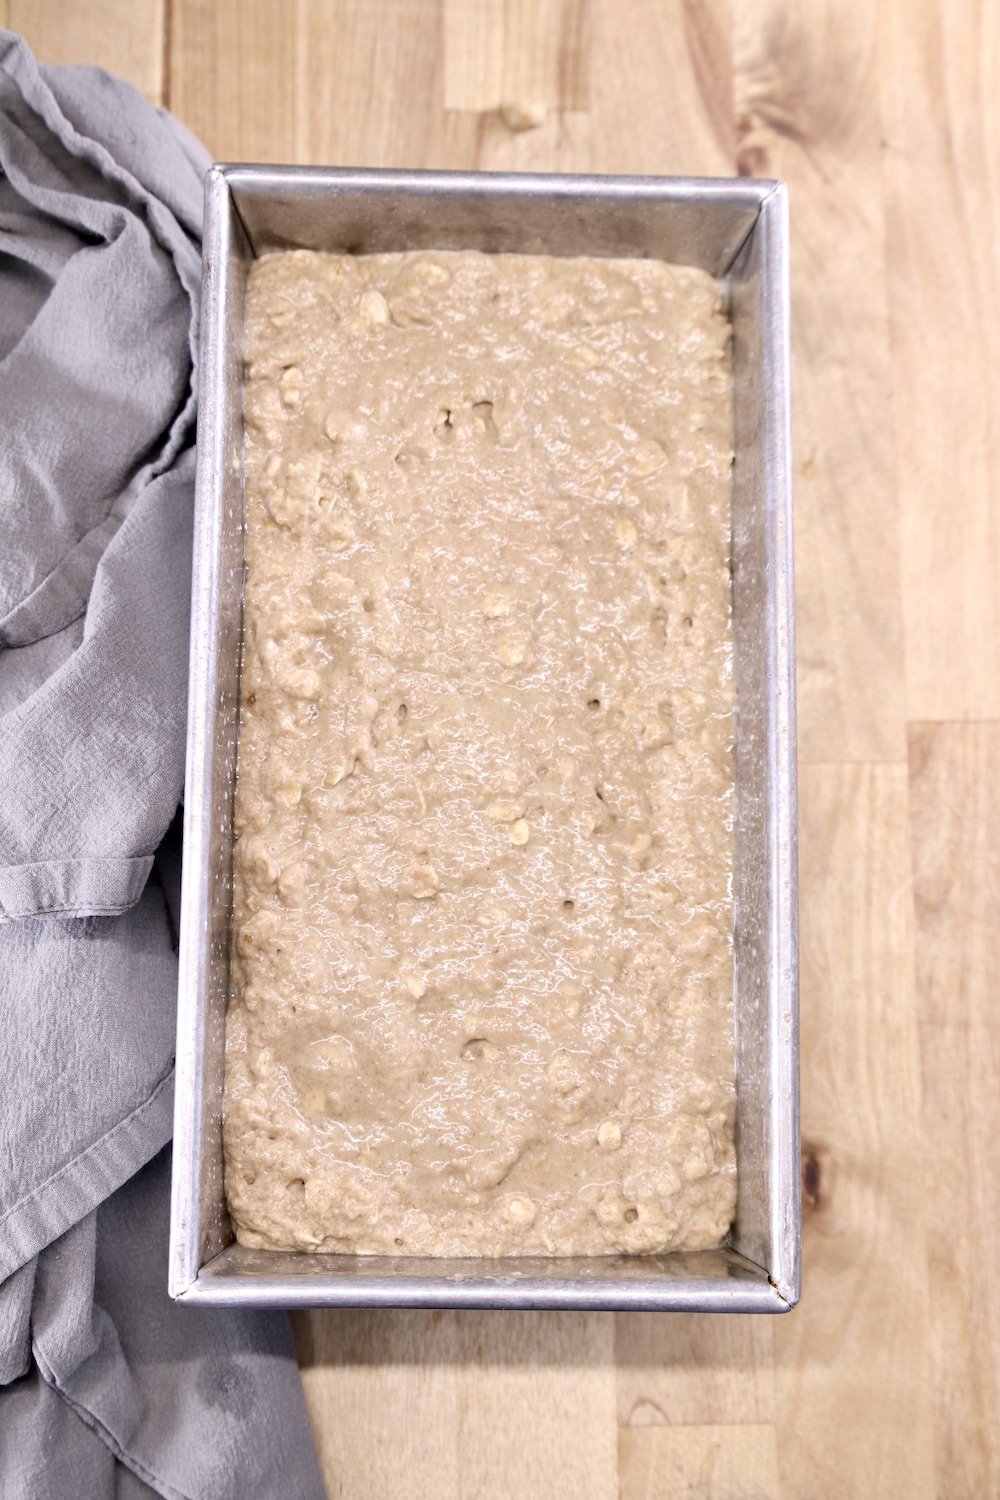 Loaf pan with brown bread batter